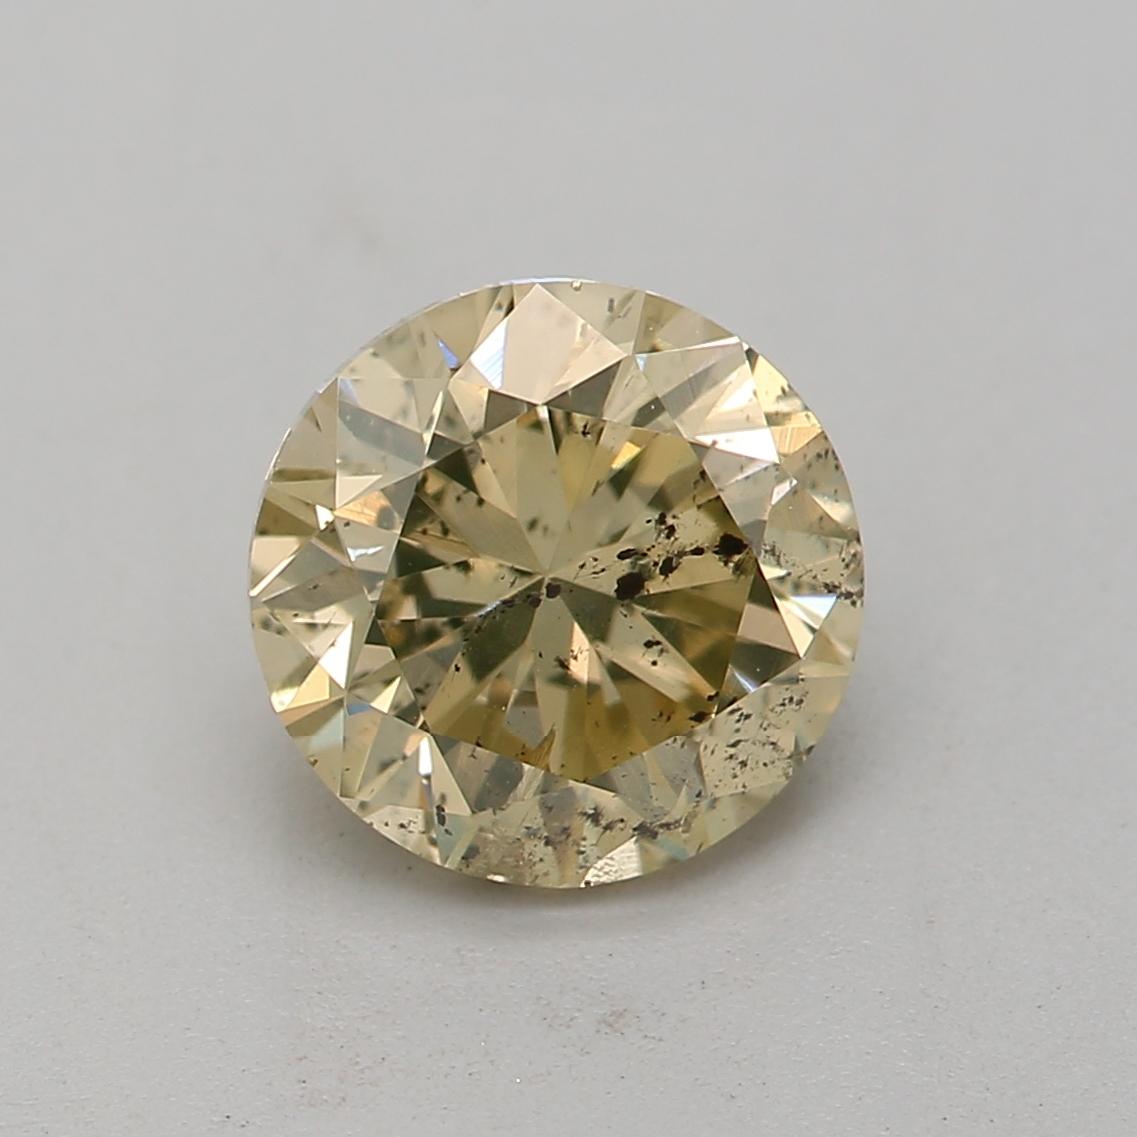 *100% NATURAL FANCY COLOUR DIAMOND*

✪ Diamond Details ✪

➛ Shape: Round
➛ Colour Grade: Fancy Brownish Yellow
➛ Carat: 1.03
➛ Clarity: I1
➛ GIA  Certified 

^FEATURES OF THE DIAMOND^

✪ Our Specialty ✪

➛ We can definitely work on your special